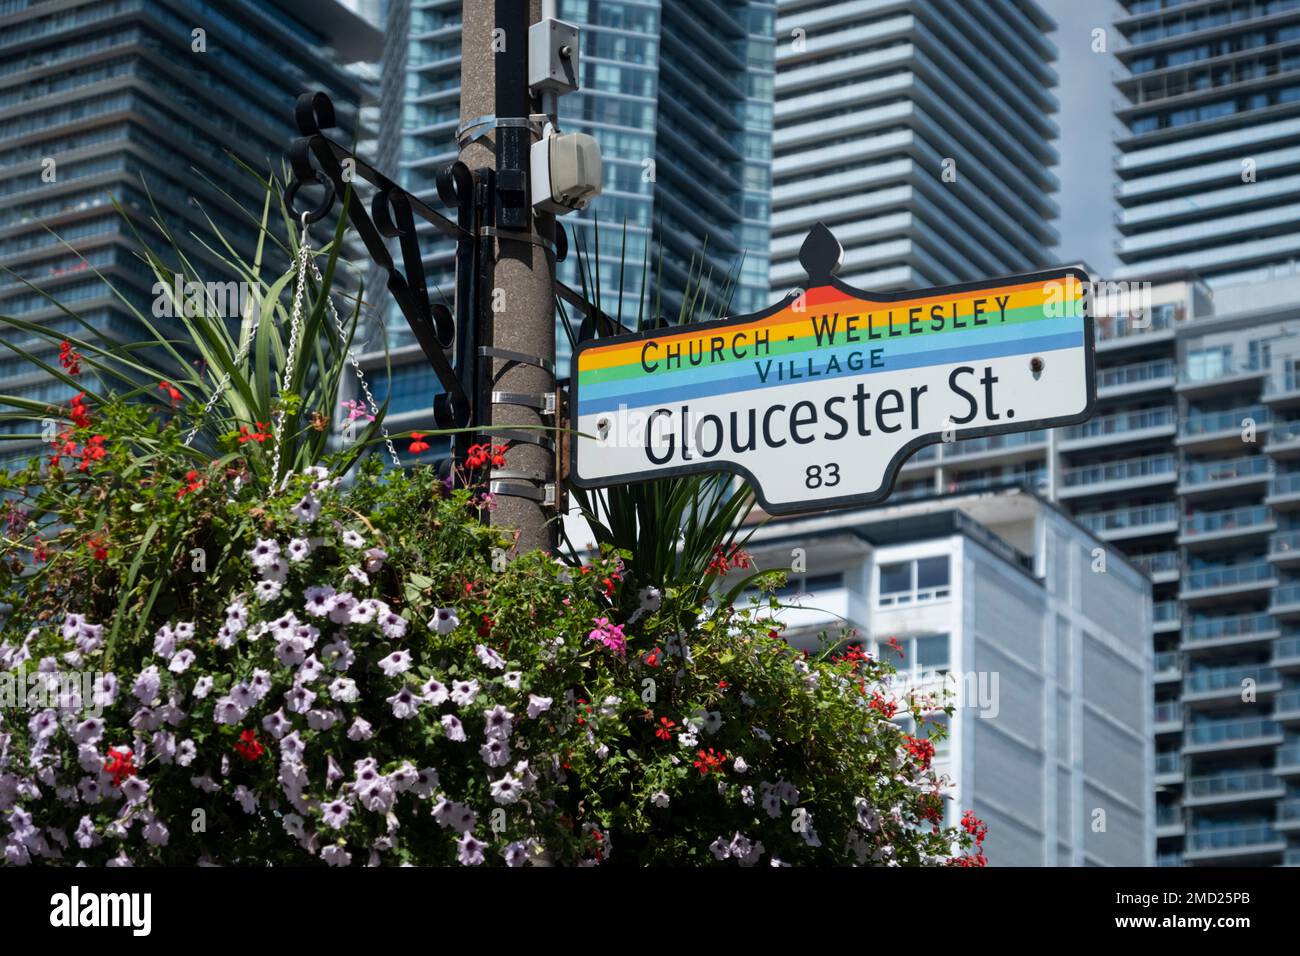 Colourful Gloucester Street and Church Wellesley Village Sign, Church Wellesley Village, Toronto, Canada Stock Photo